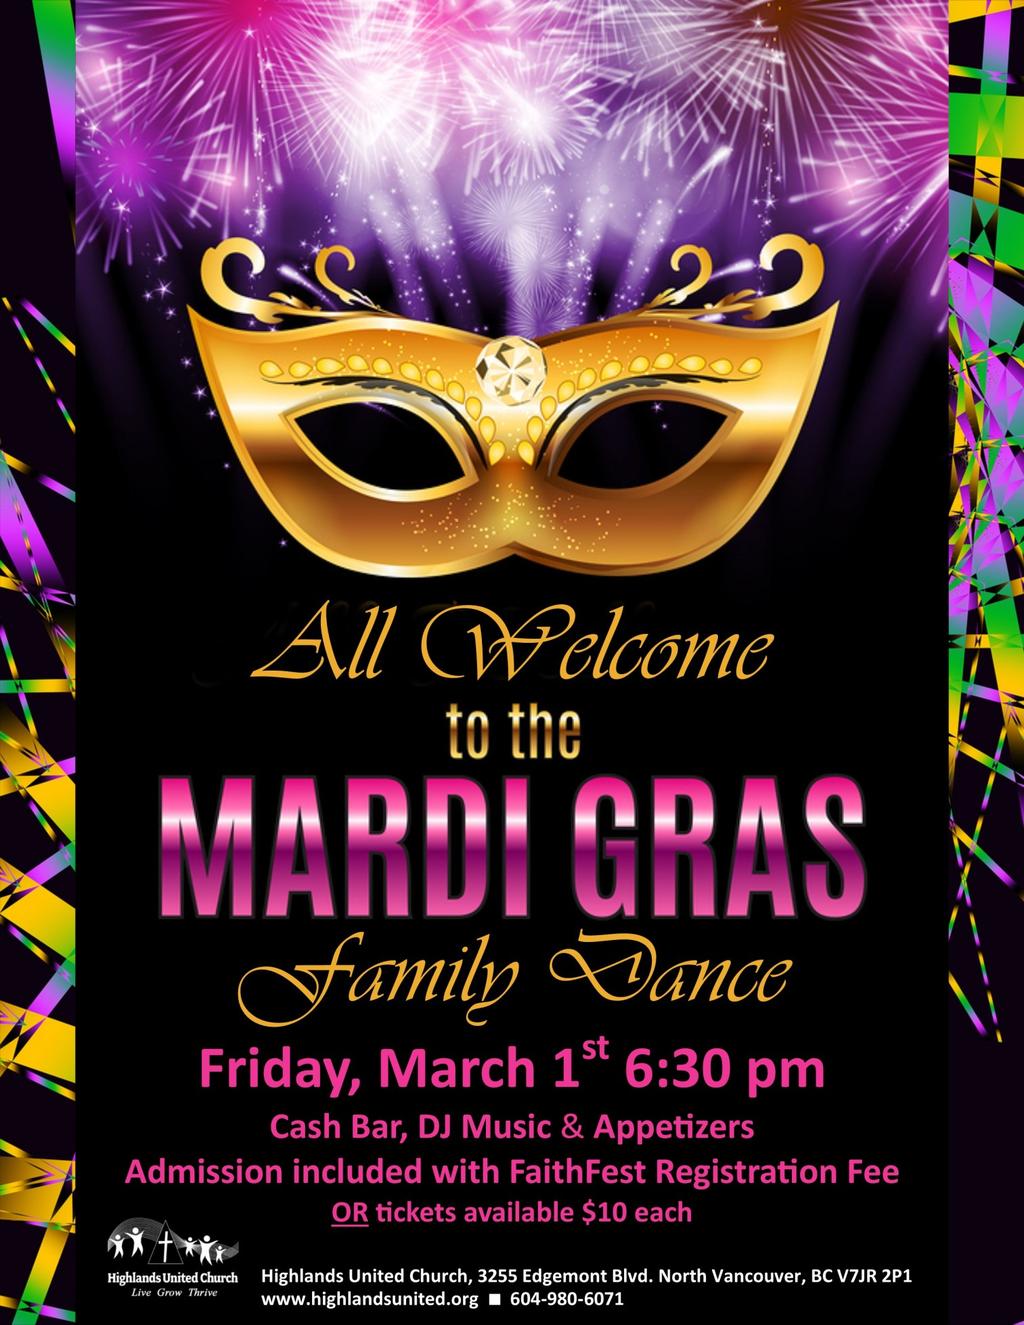 The Mardi Gras Family Dance is part of the FaithFest weekend. The dance admission price is included in your FaithFest registration fee.